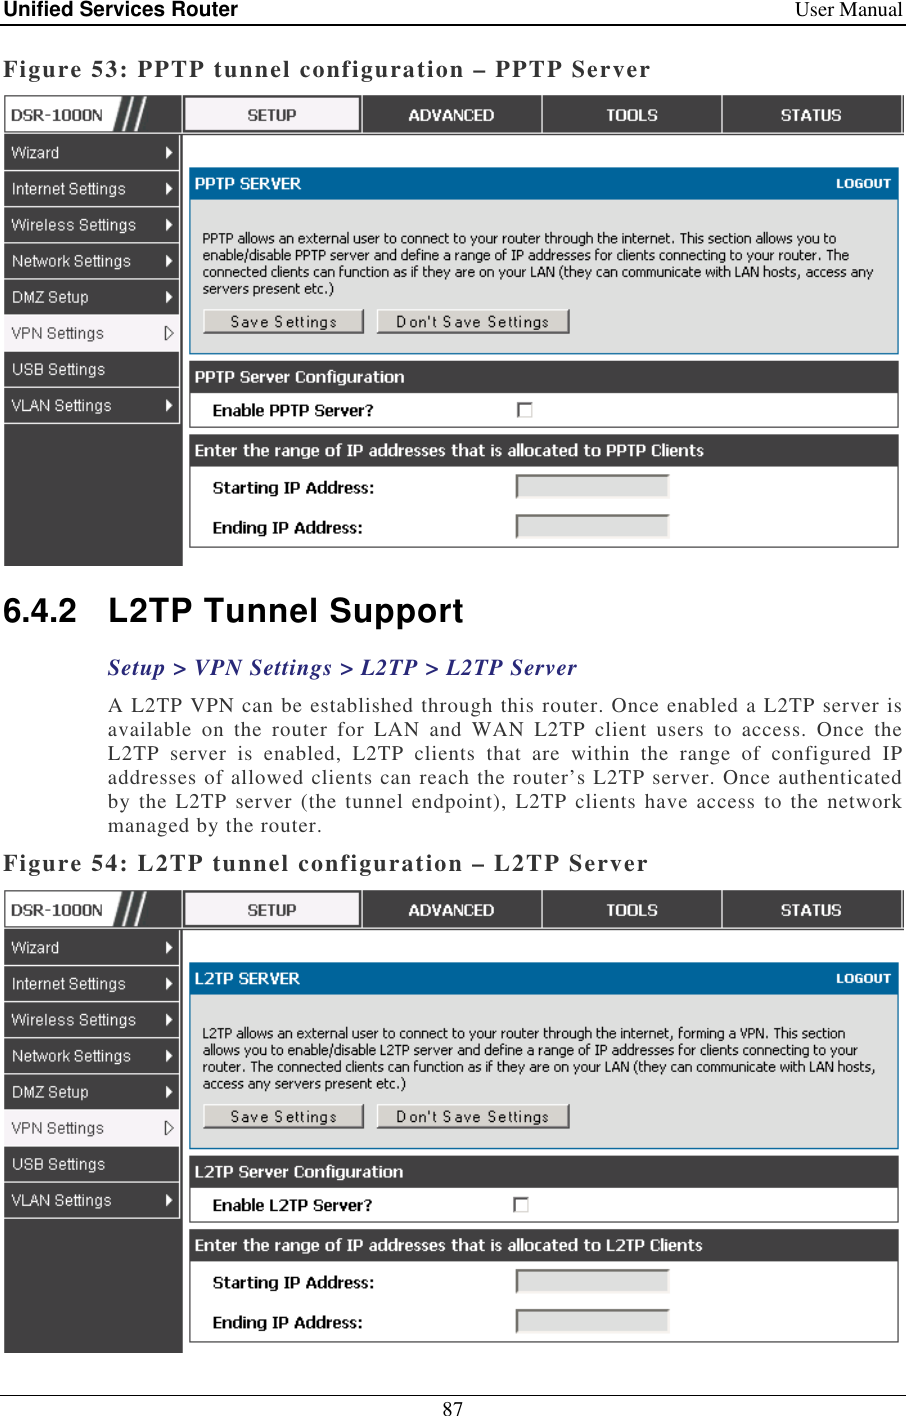 Unified Services Router    User Manual 87  Figure 53: PPTP tunnel configuration – PPTP Server  6.4.2  L2TP Tunnel Support Setup &gt; VPN Settings &gt; L2TP &gt; L2TP Server A L2TP VPN can be established through this router. Once enabled a L2TP server is available  on  the  router  for  LAN  and  WAN  L2TP  client  users  to  access.  Once  the L2TP  server  is  enabled,  L2TP  clients  that  are  within  the  range  of  configured  IP addresses of allowed clients can reach the router’s L2TP server. Once authenticated by the L2TP server  (the  tunnel  endpoint),  L2TP  clients  have  access  to  the network managed by the router.  Figure 54: L2TP tunnel configuration – L2TP Server 